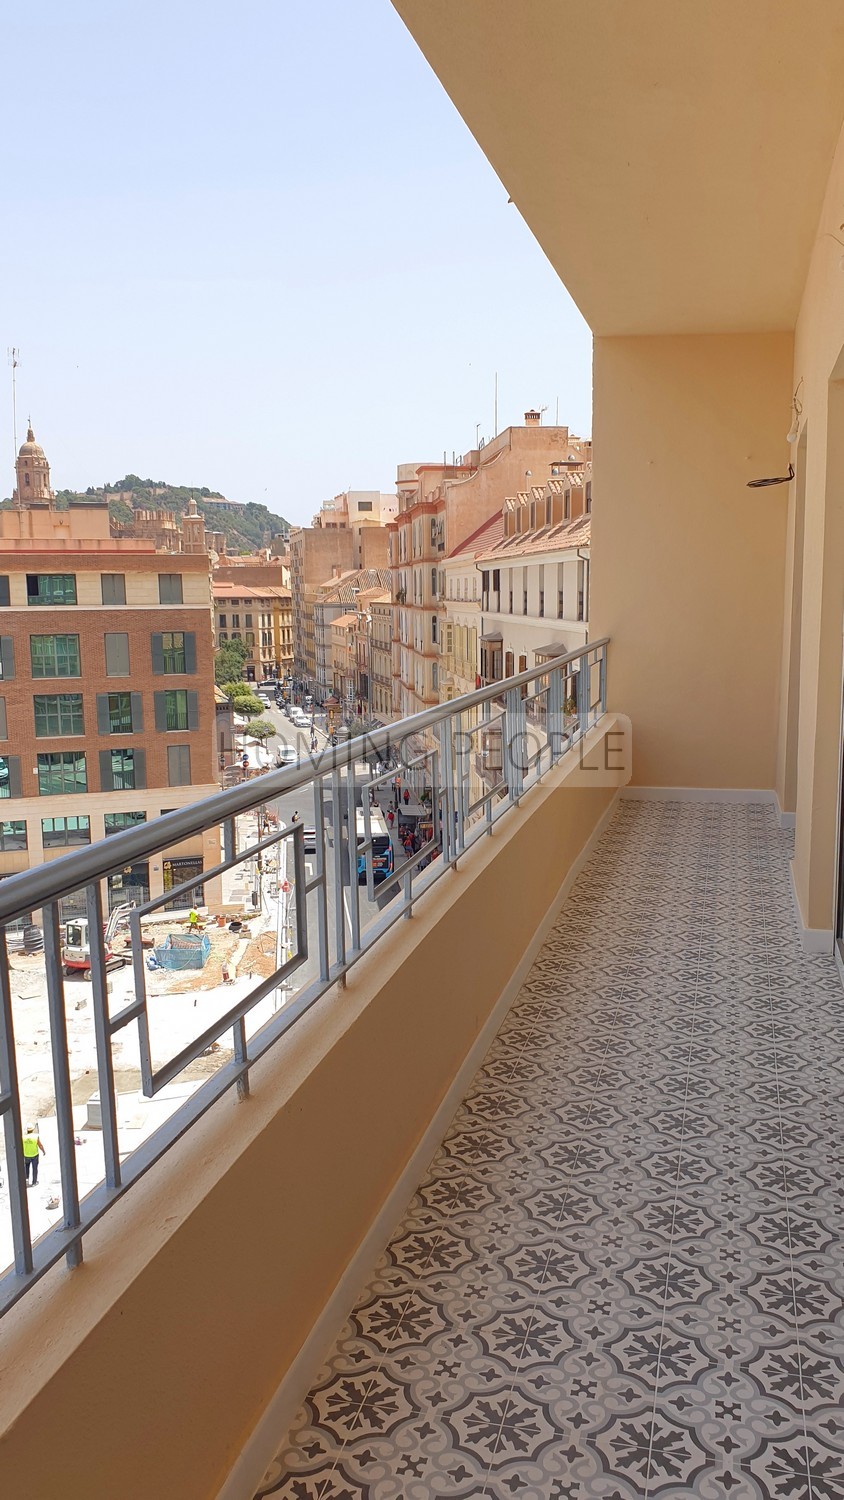 RENTED OUT_Freshly-refurbished, unfurnished flat with a terrace, located close to the main market!